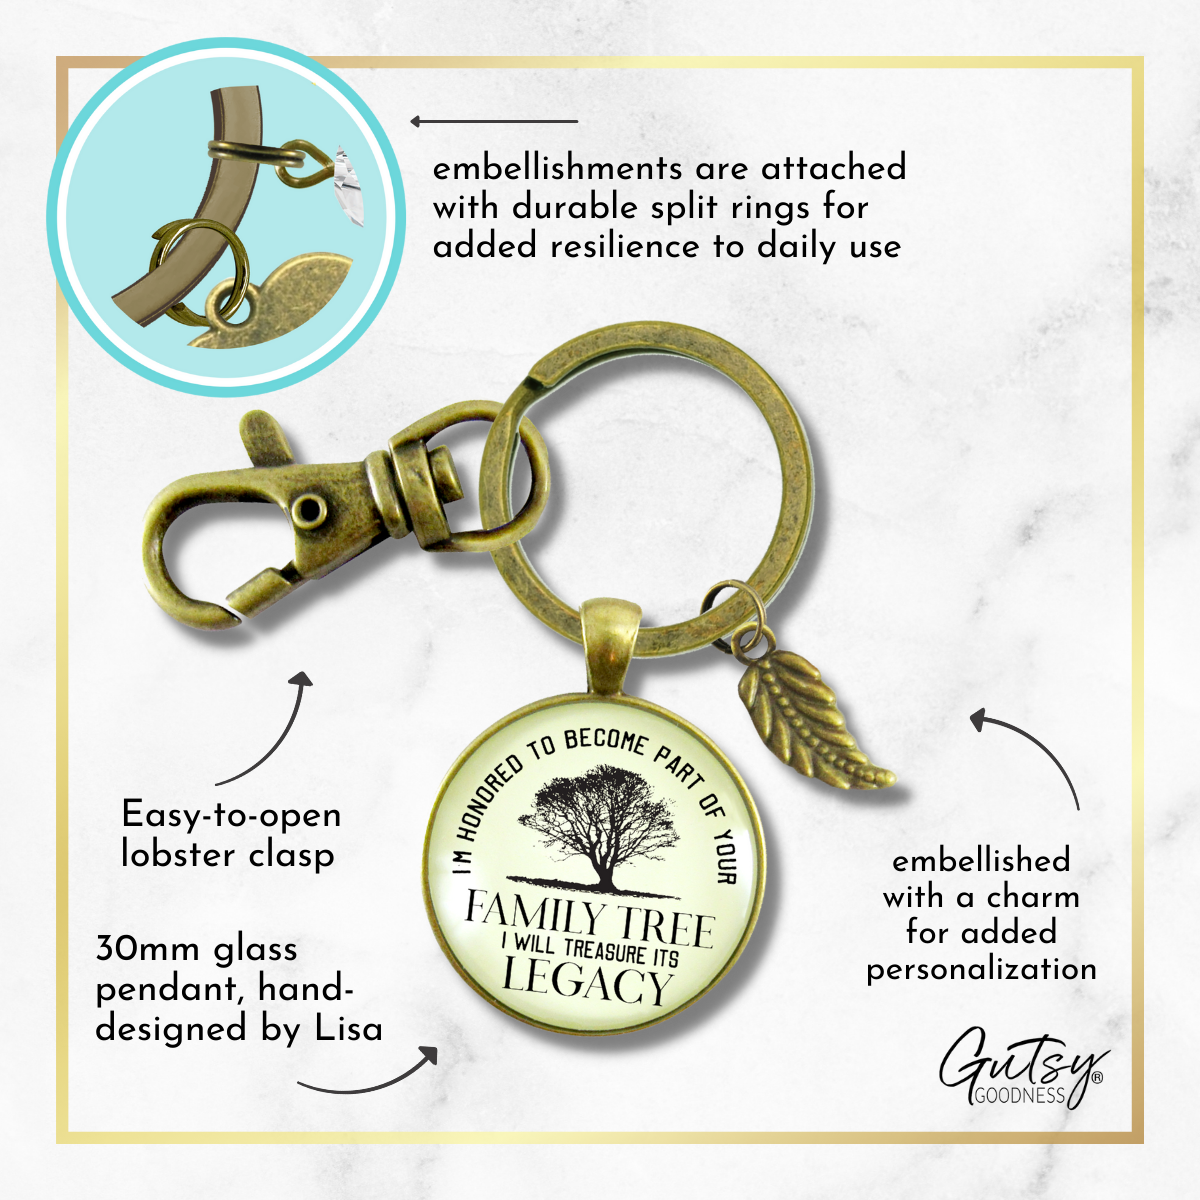 His Father In Law Gift Keychain Honored Family Tree From Groom To Father of Bride Wedding Key Ring - Gutsy Goodness Handmade Jewelry;His Father In Law Gift Keychain Honored Family Tree From Groom To Father Of Bride Wedding Key Ring - Gutsy Goodness Handmade Jewelry Gifts